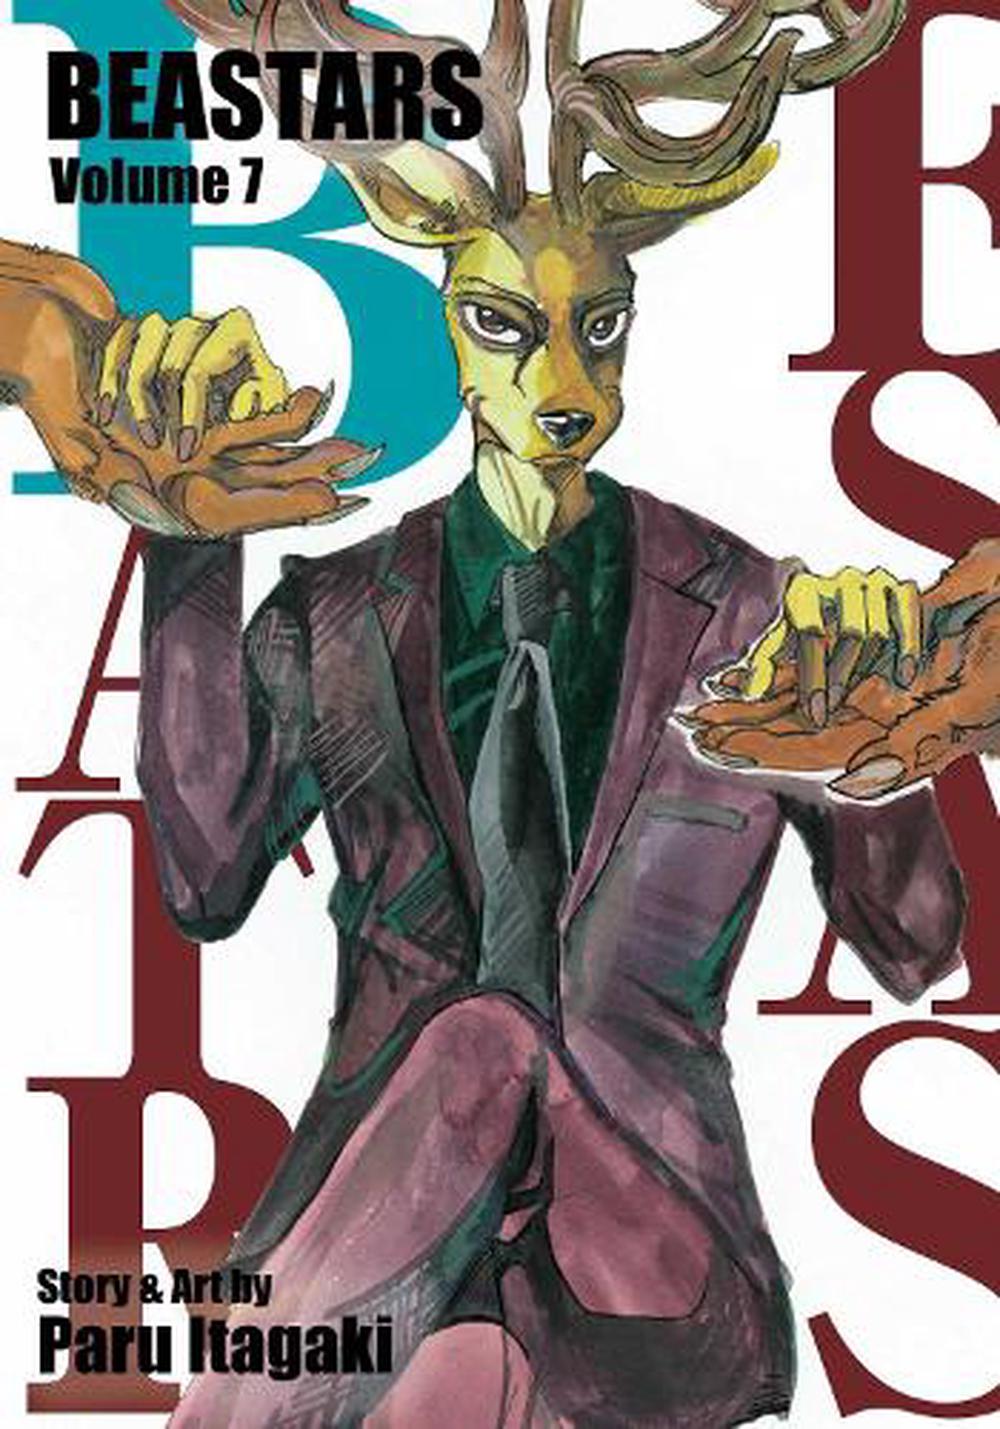 Beastars Vol 7 By Paru Itagaki Paperback Buy Online At The Nile